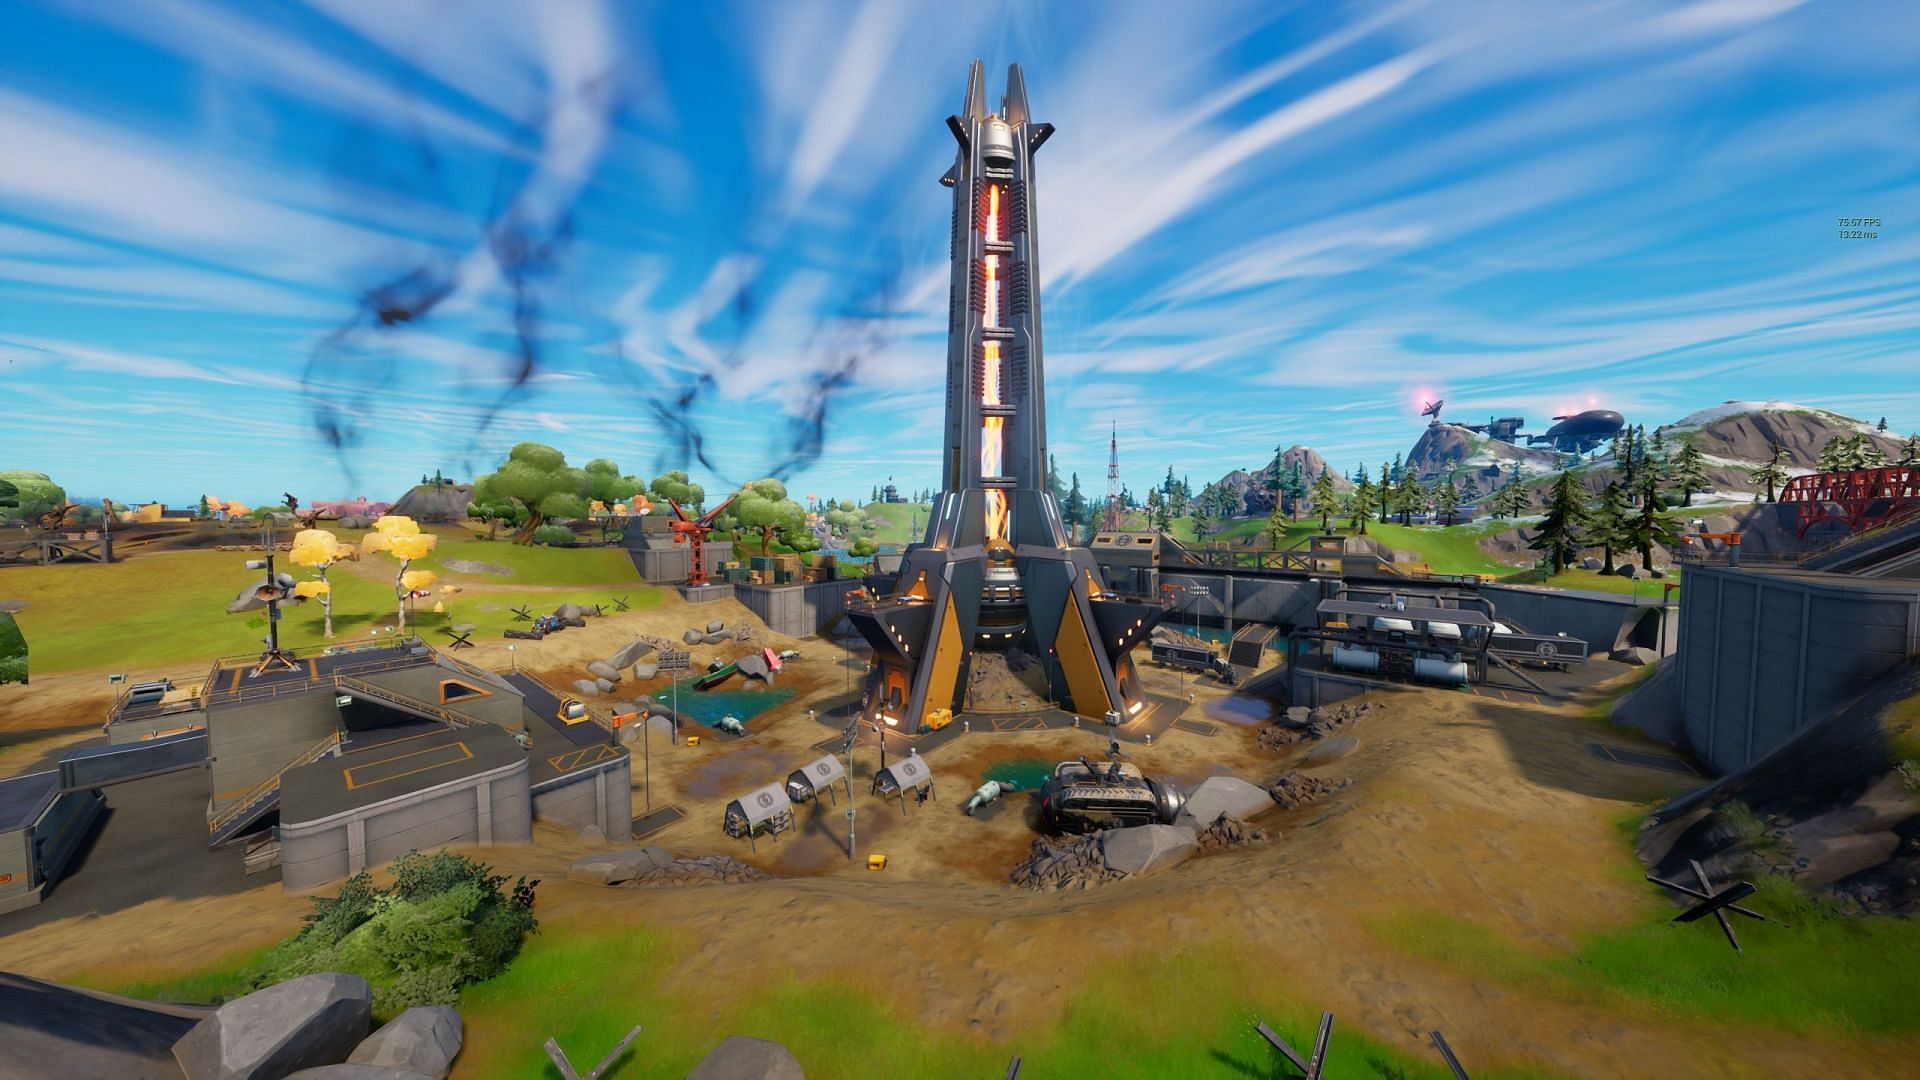 The next Fortnite update may add a new live event